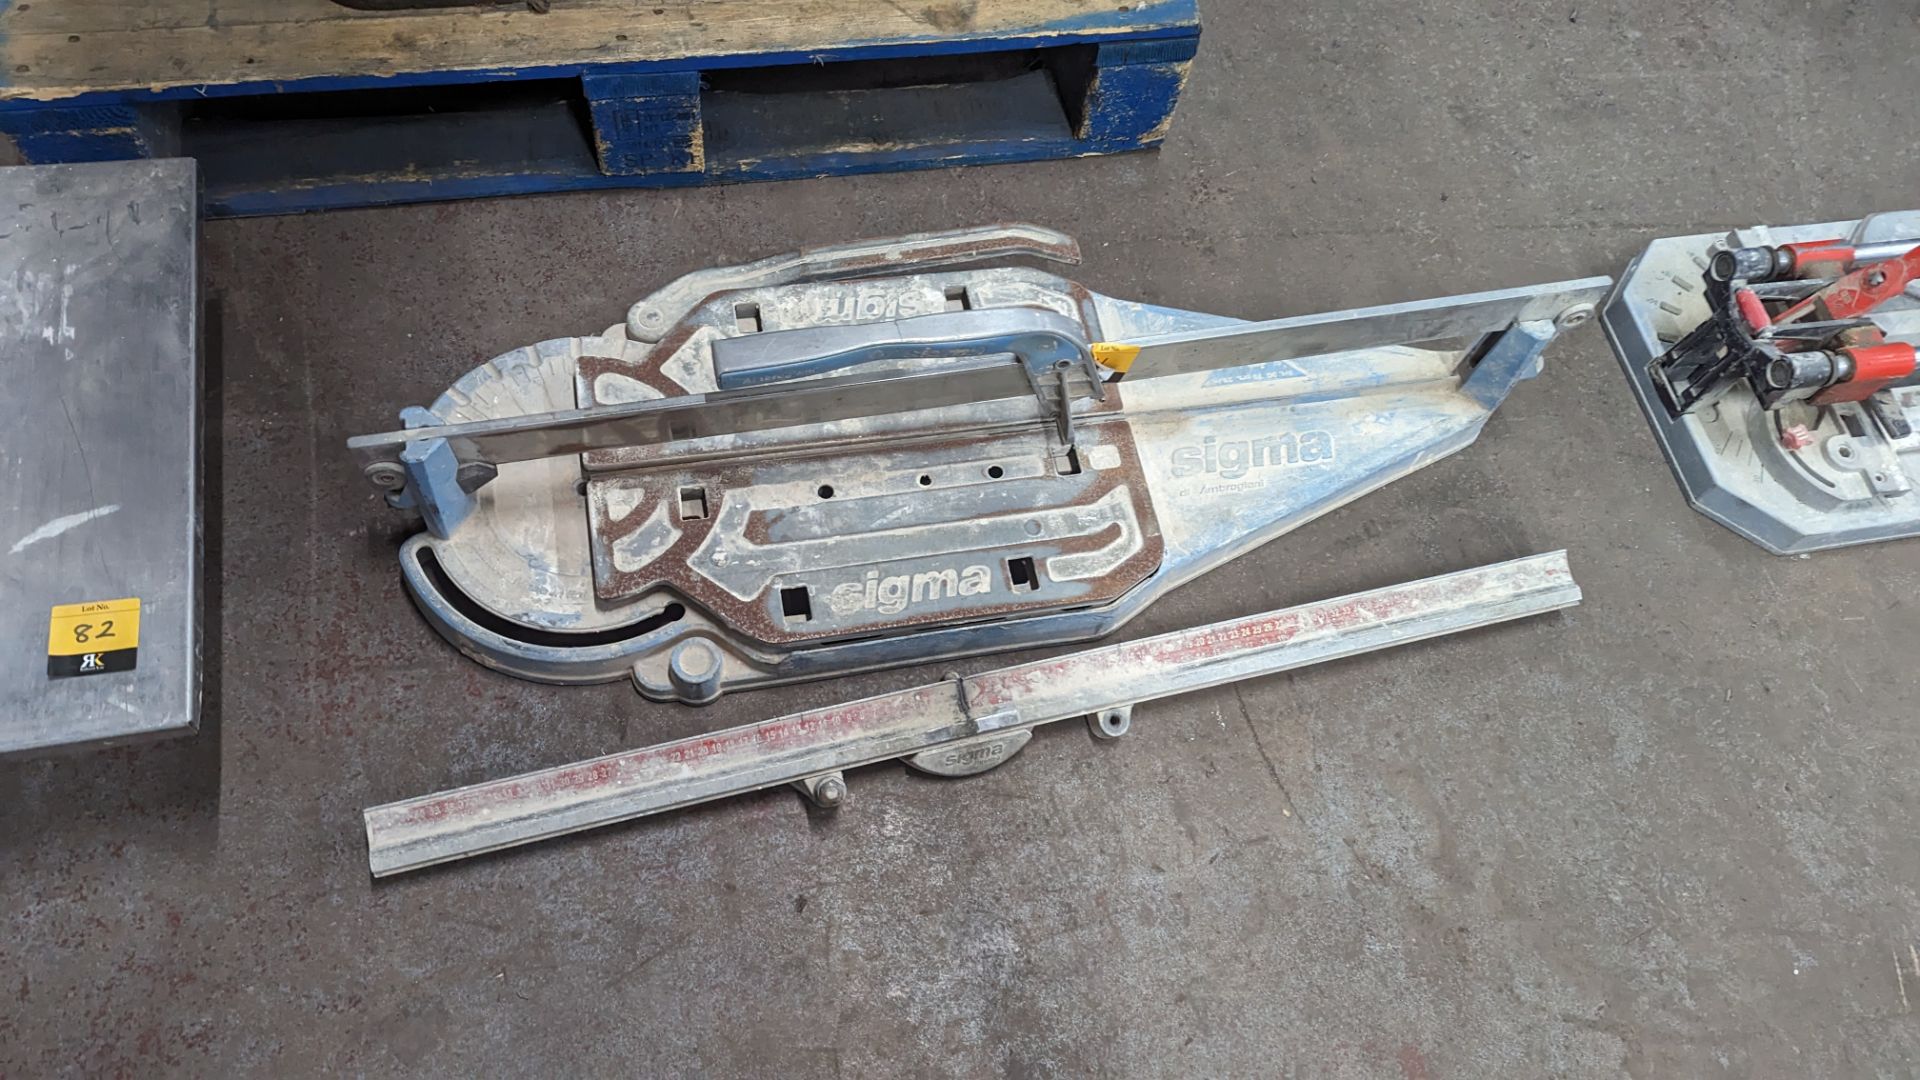 Sigma tile cutter - Image 3 of 4